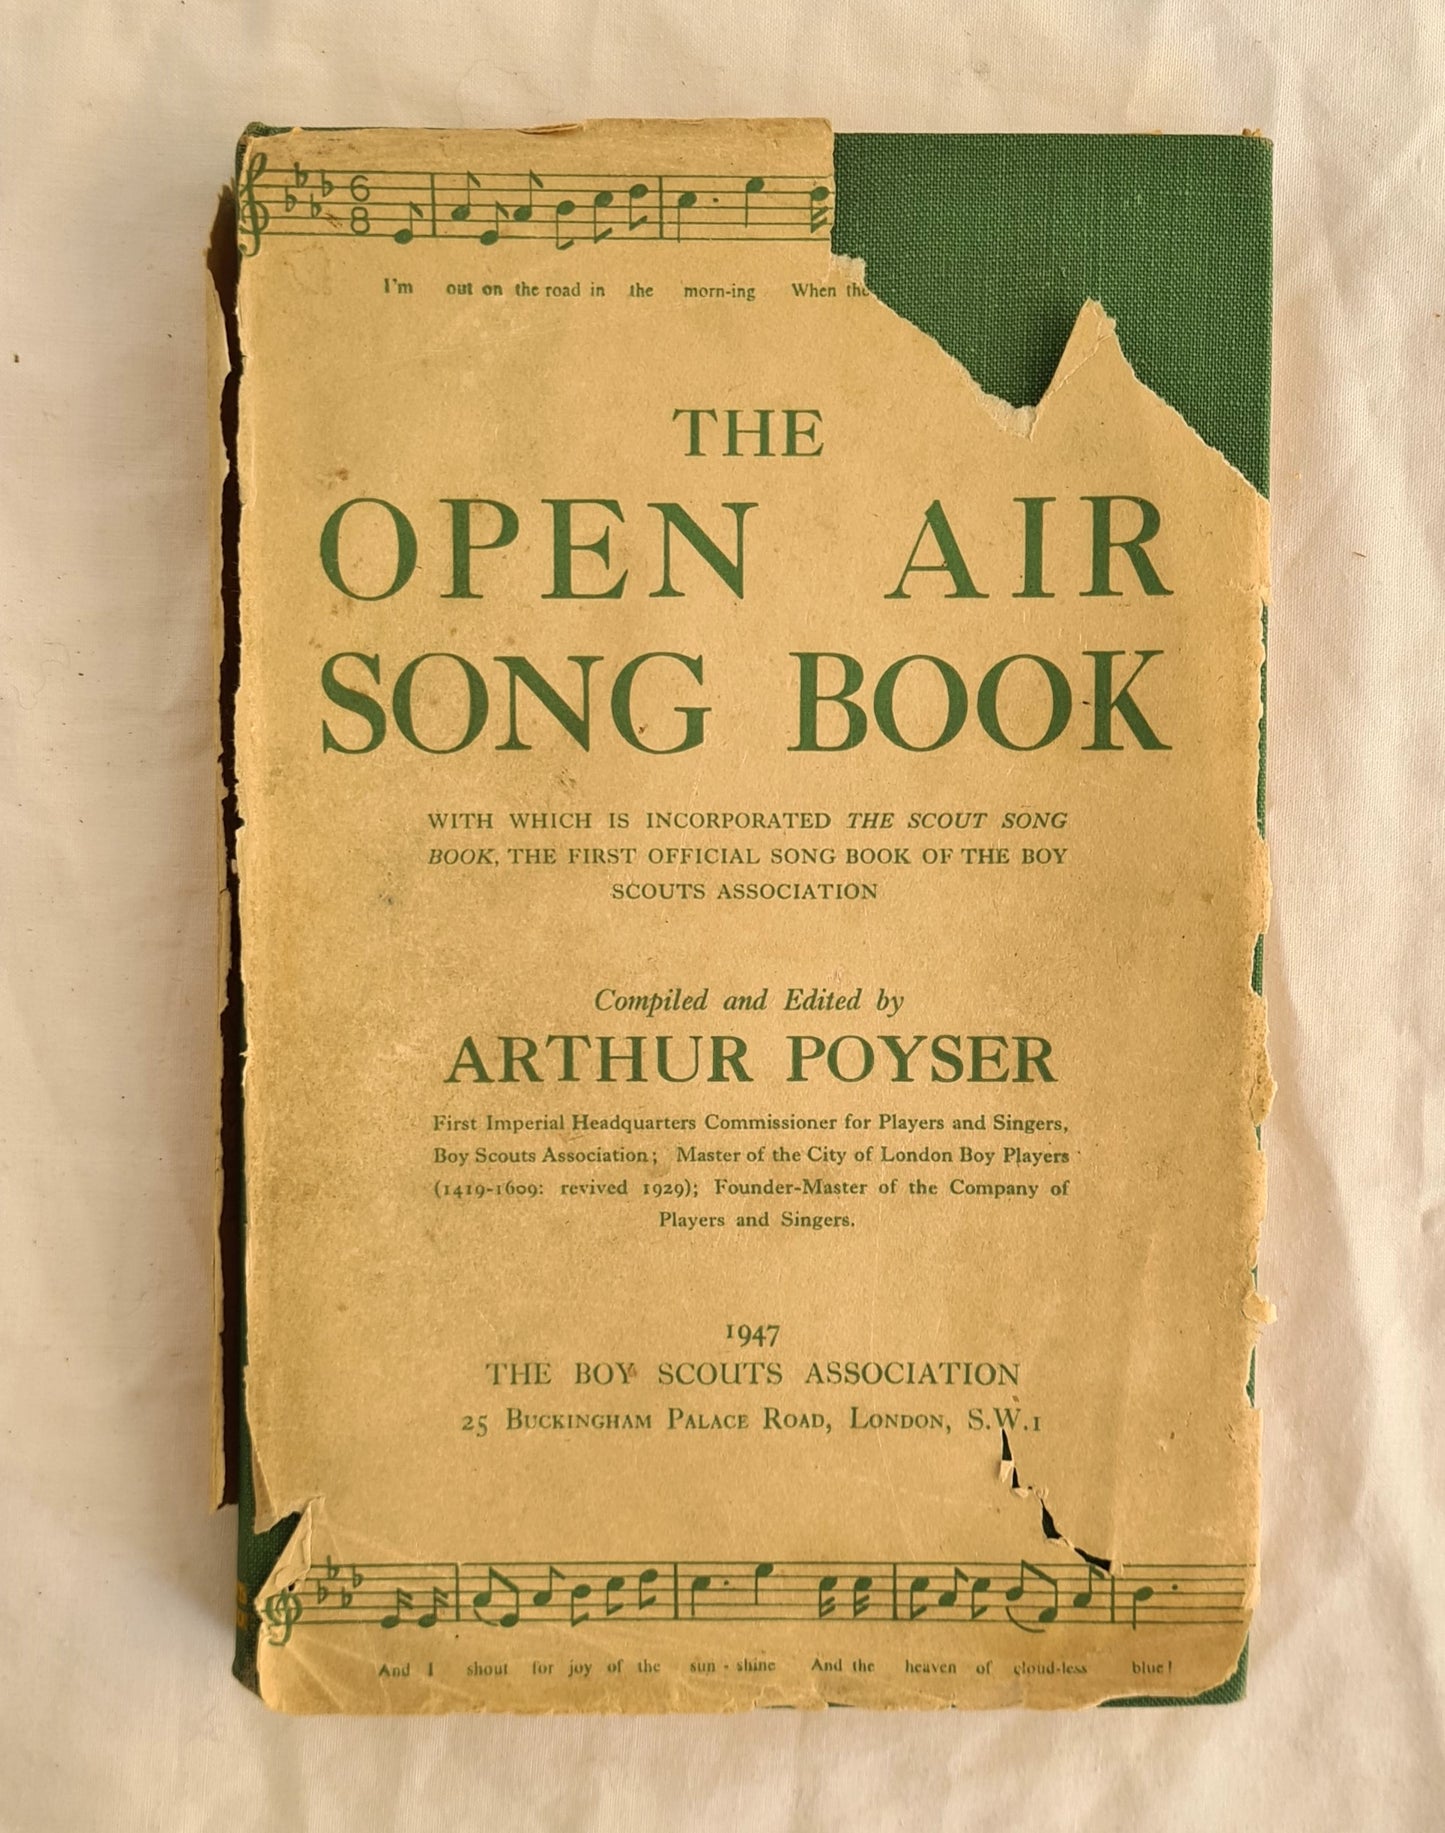 The Open Air Song Book  With which is incorporated The Scout Song Book, the first official song book of the Boy Scouts Association  Compiled and edited by Arthur Poyser